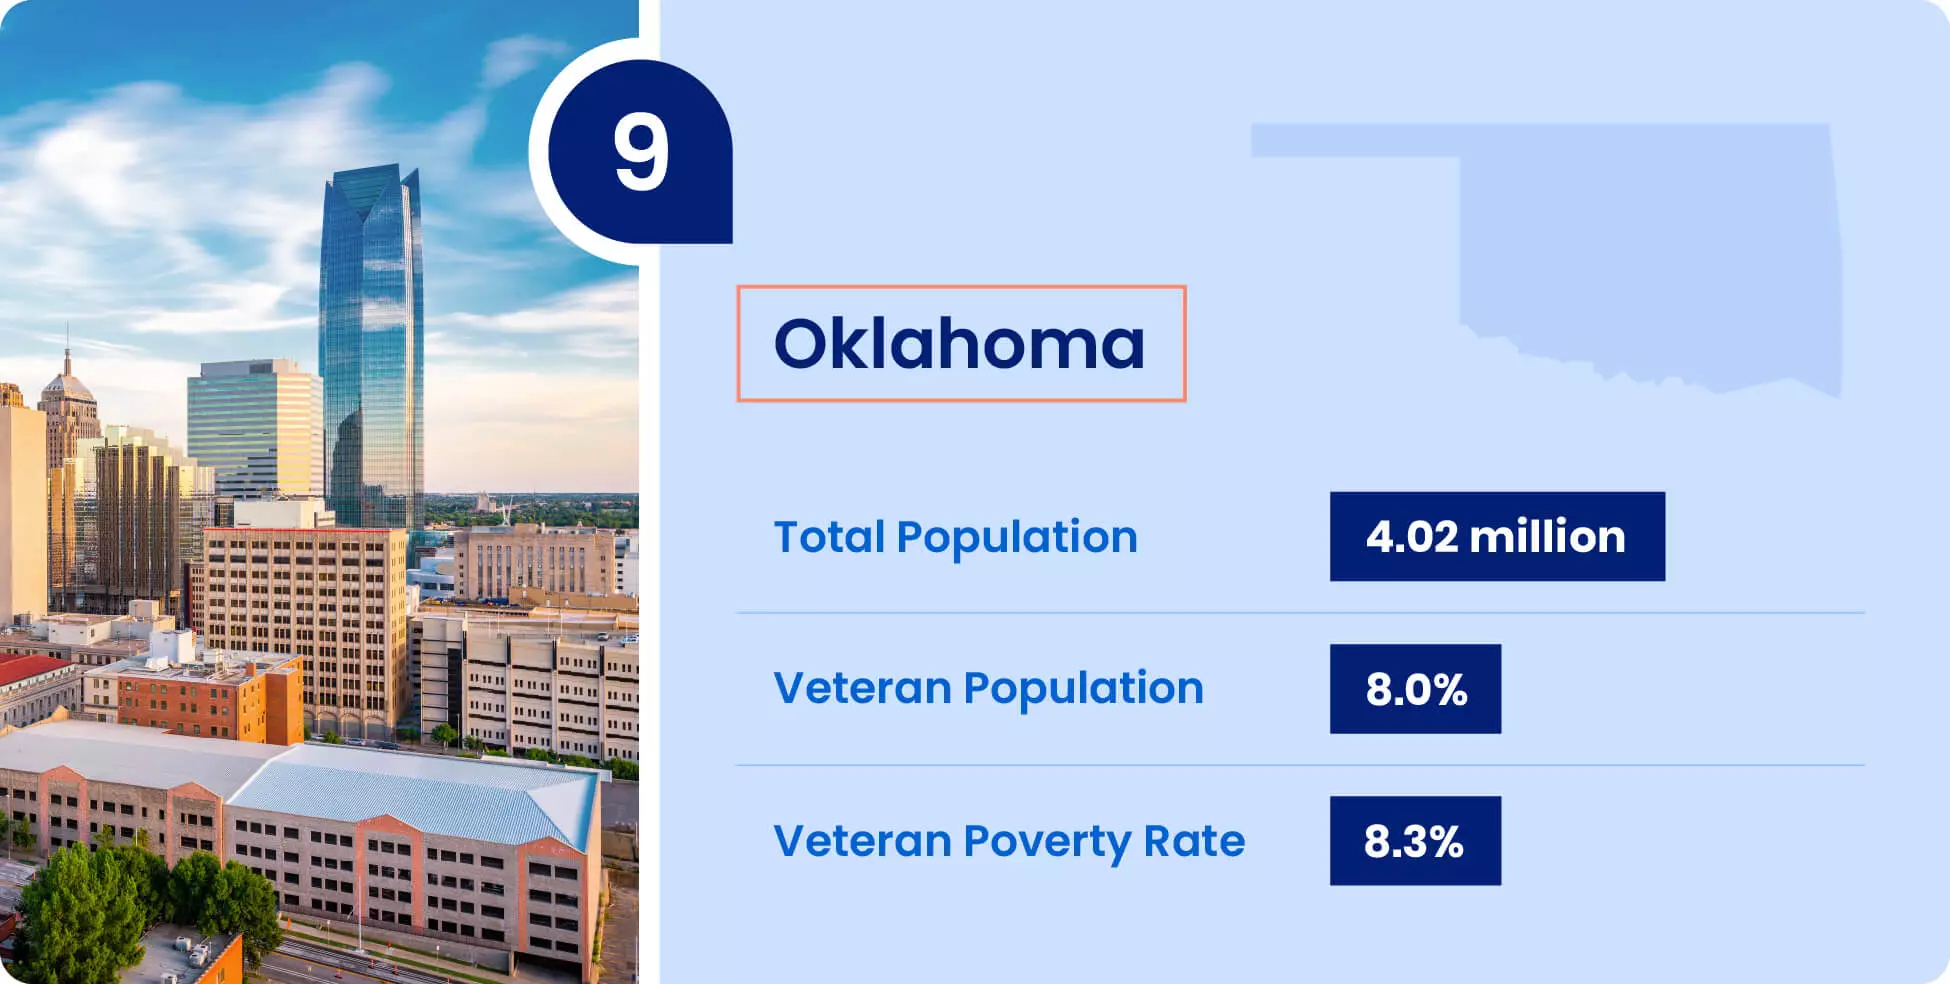 Image shows key information for military retirees thinking of moving to Oklahoma.